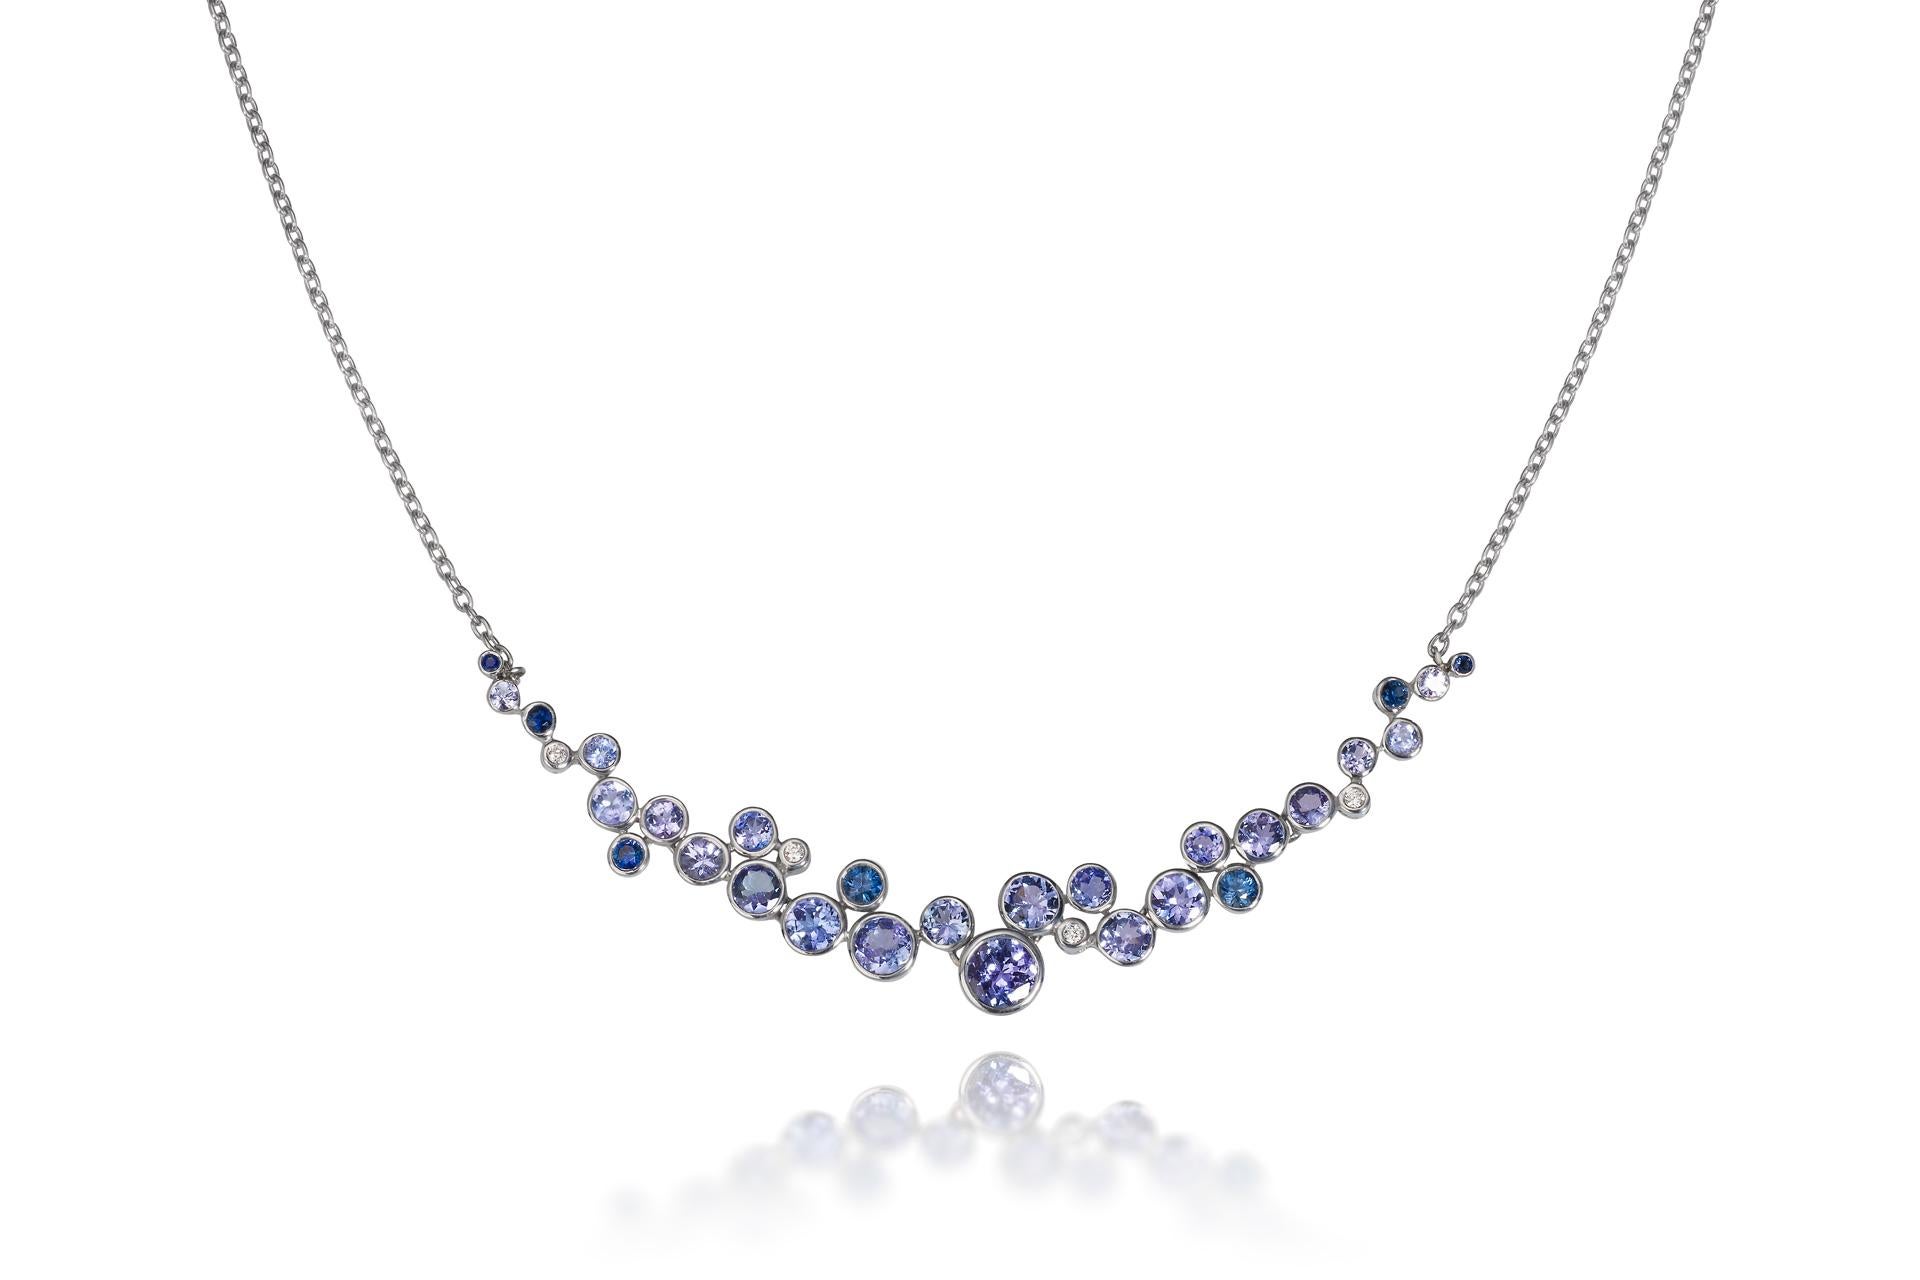 Women's Constellation Necklace with Multi-Color Gemstones and Diamonds